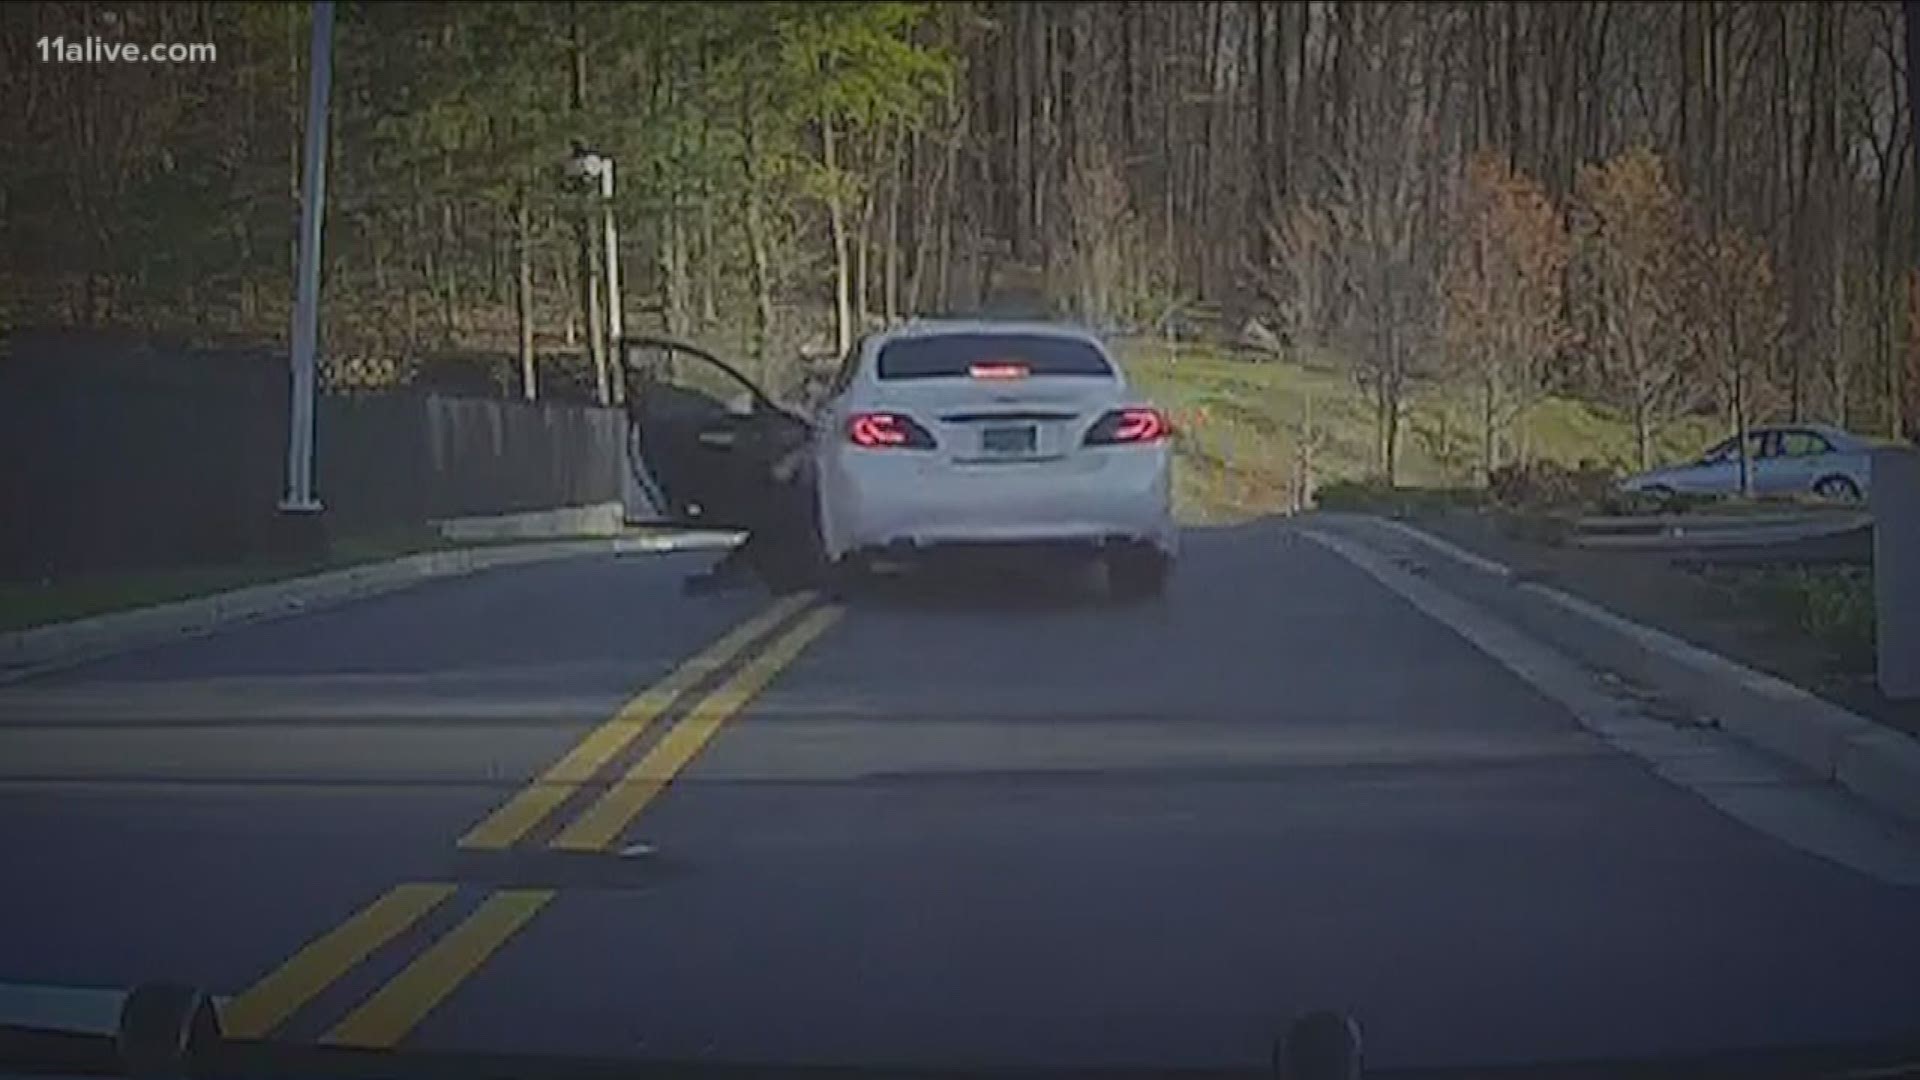 Video shows a suspected impaired driver dragging an officer several feet in his car.